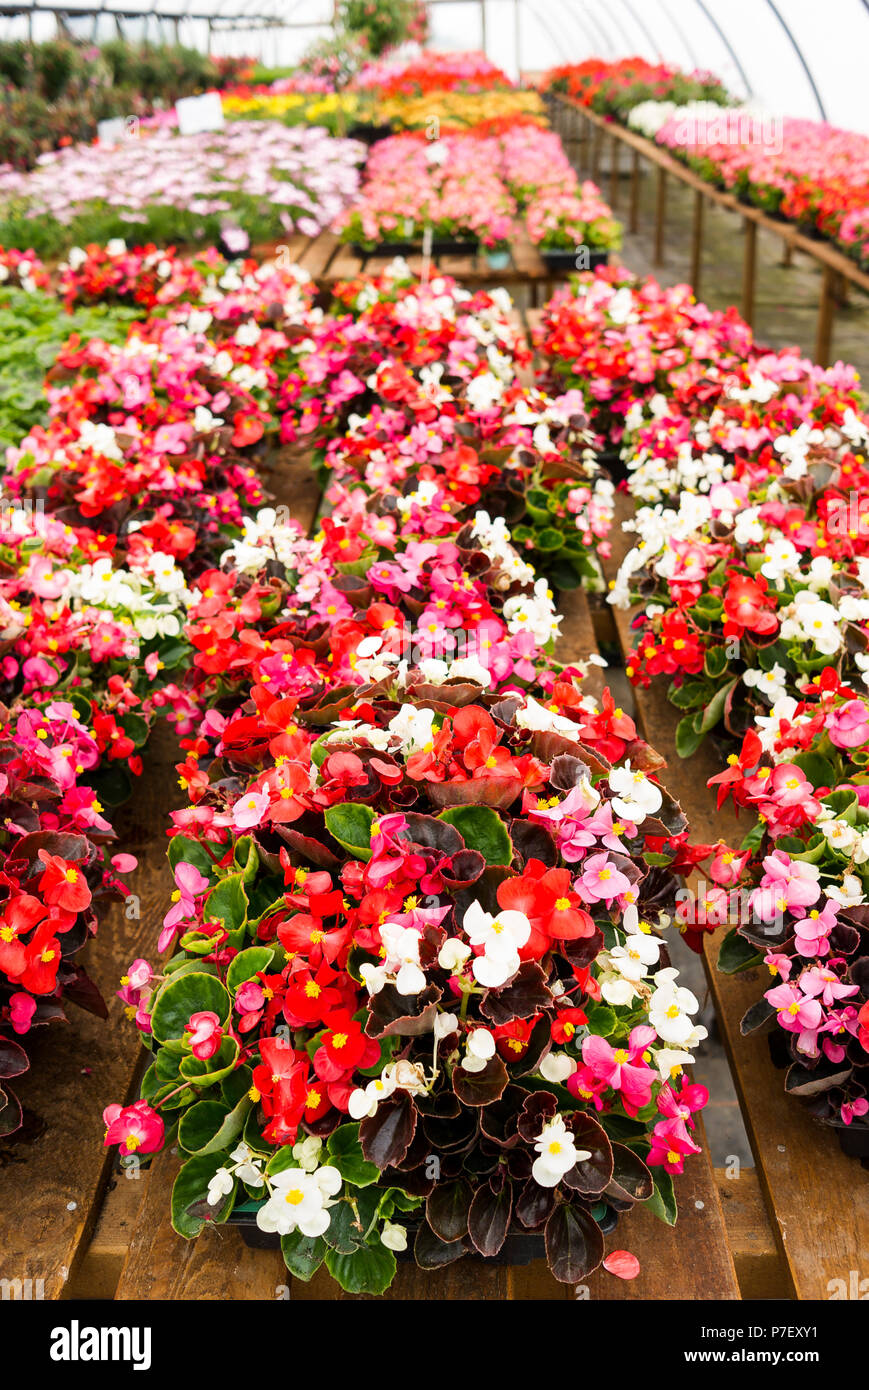 A colourful display of bedding begonias and other plants for sale at an English plant nursery Stock Photo